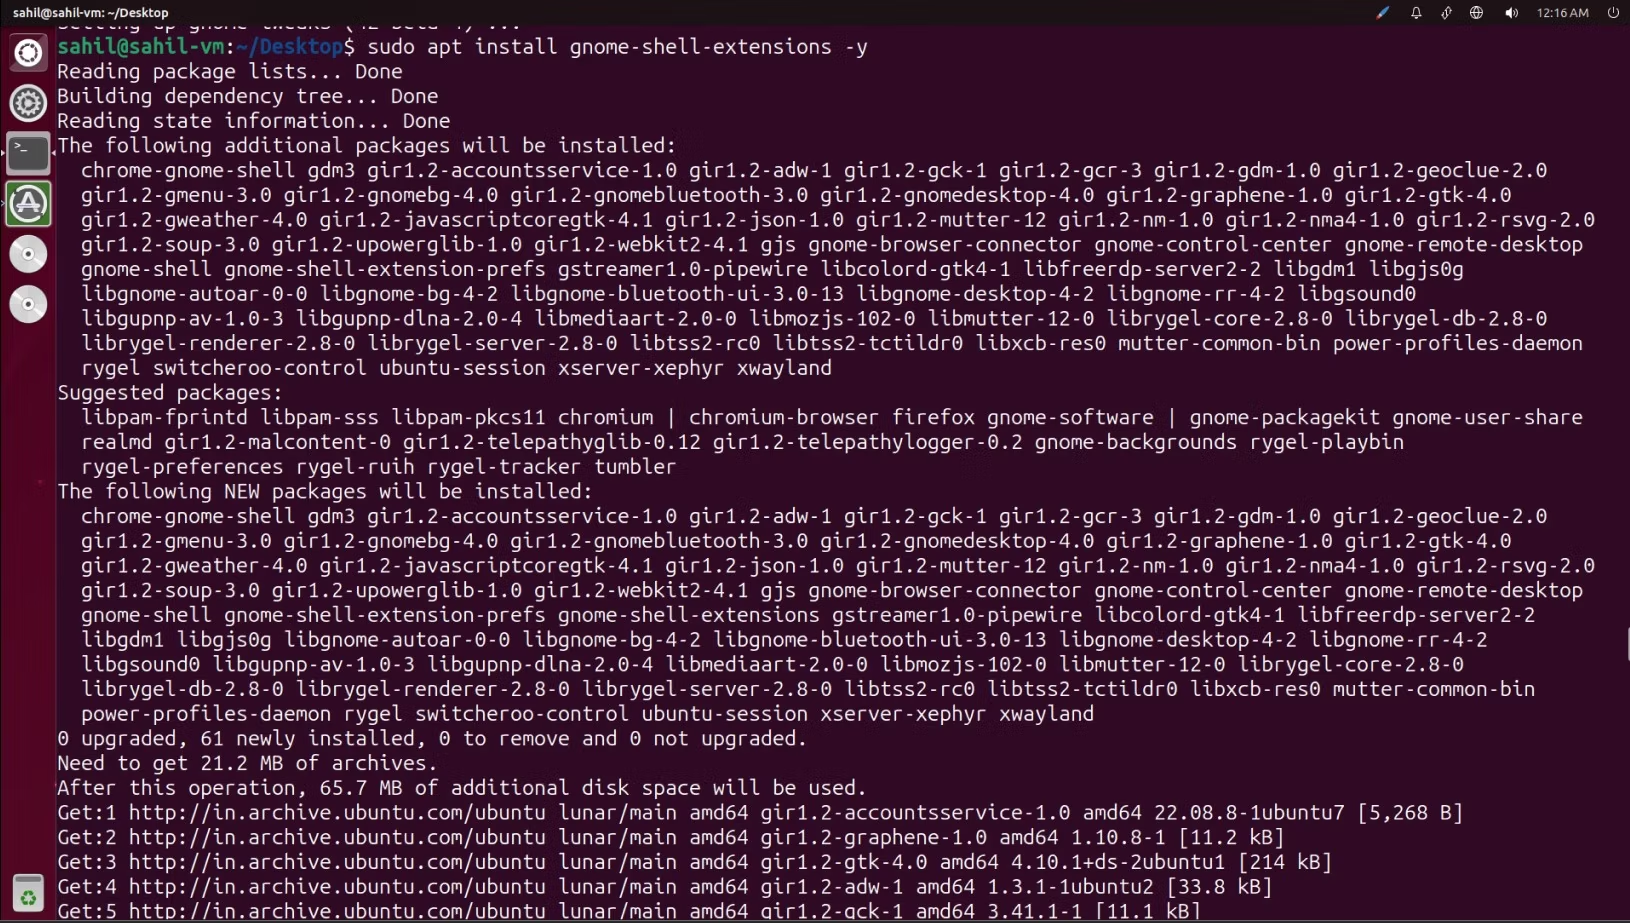 sudo apt install gnome-shell-extensions -y